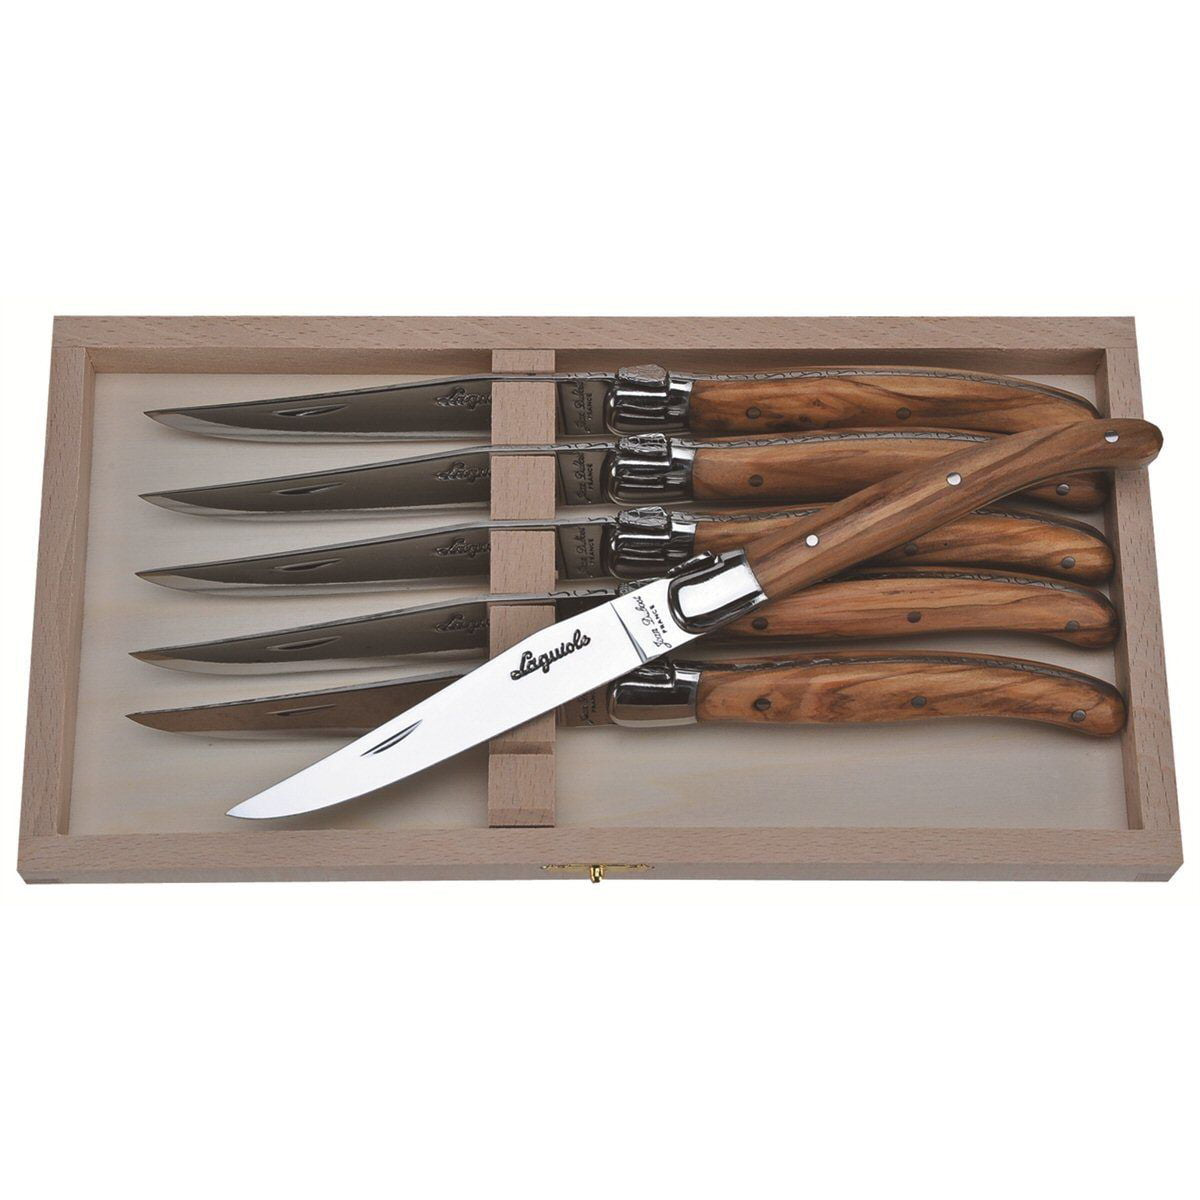 Jean Dubost 6 Steak Knives in Leather Pouch Olive Wood